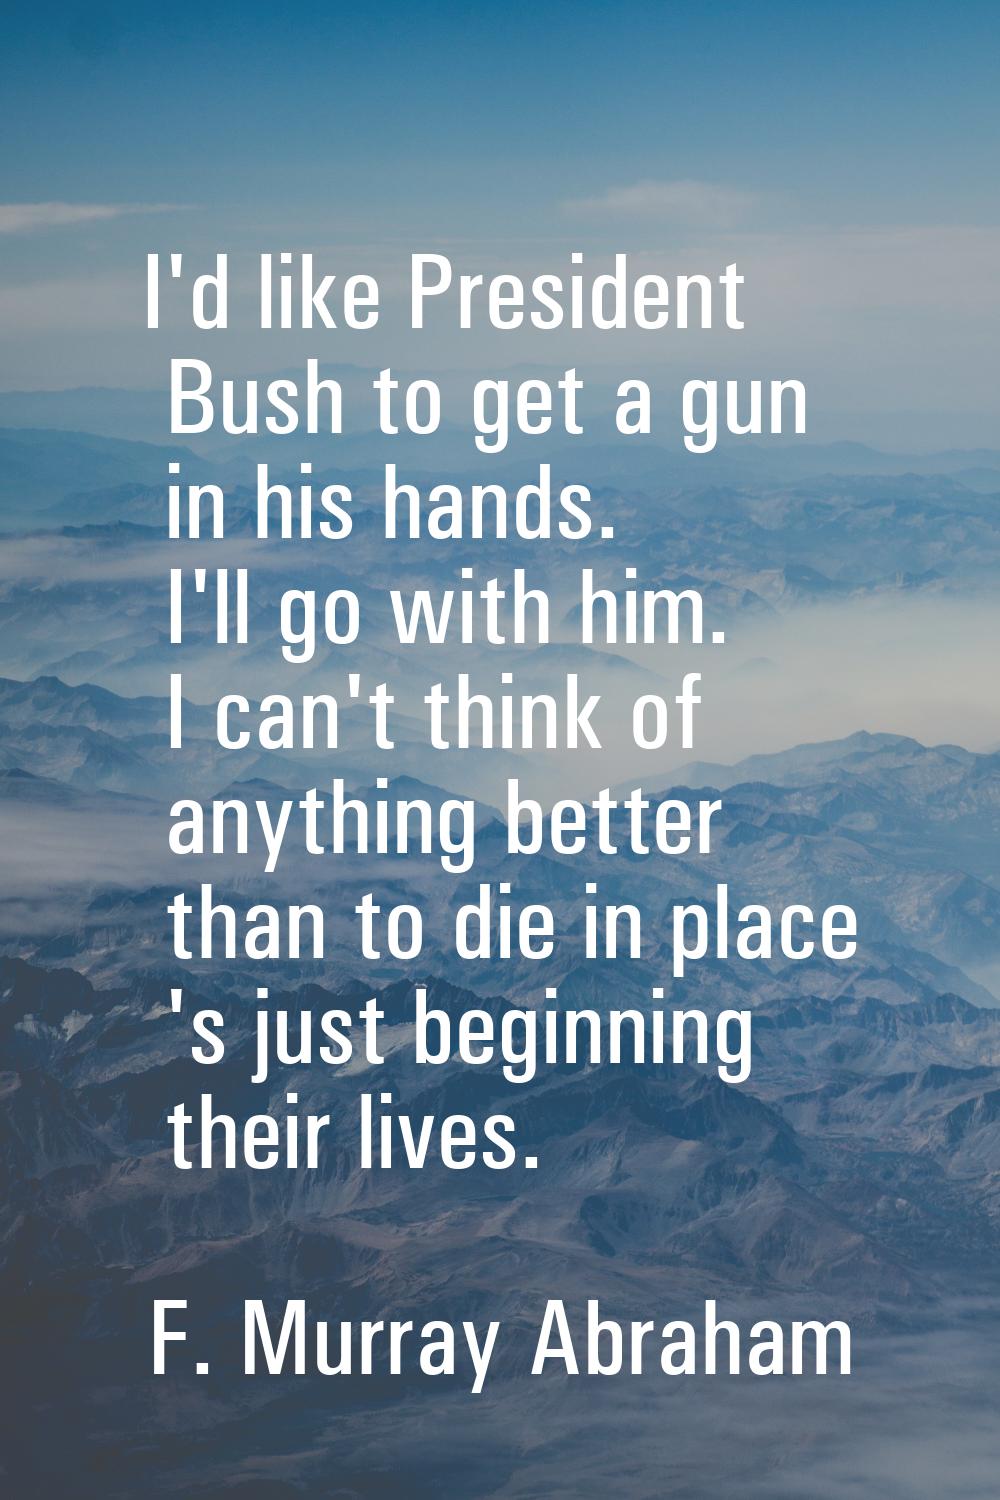 I'd like President Bush to get a gun in his hands. I'll go with him. I can't think of anything bett